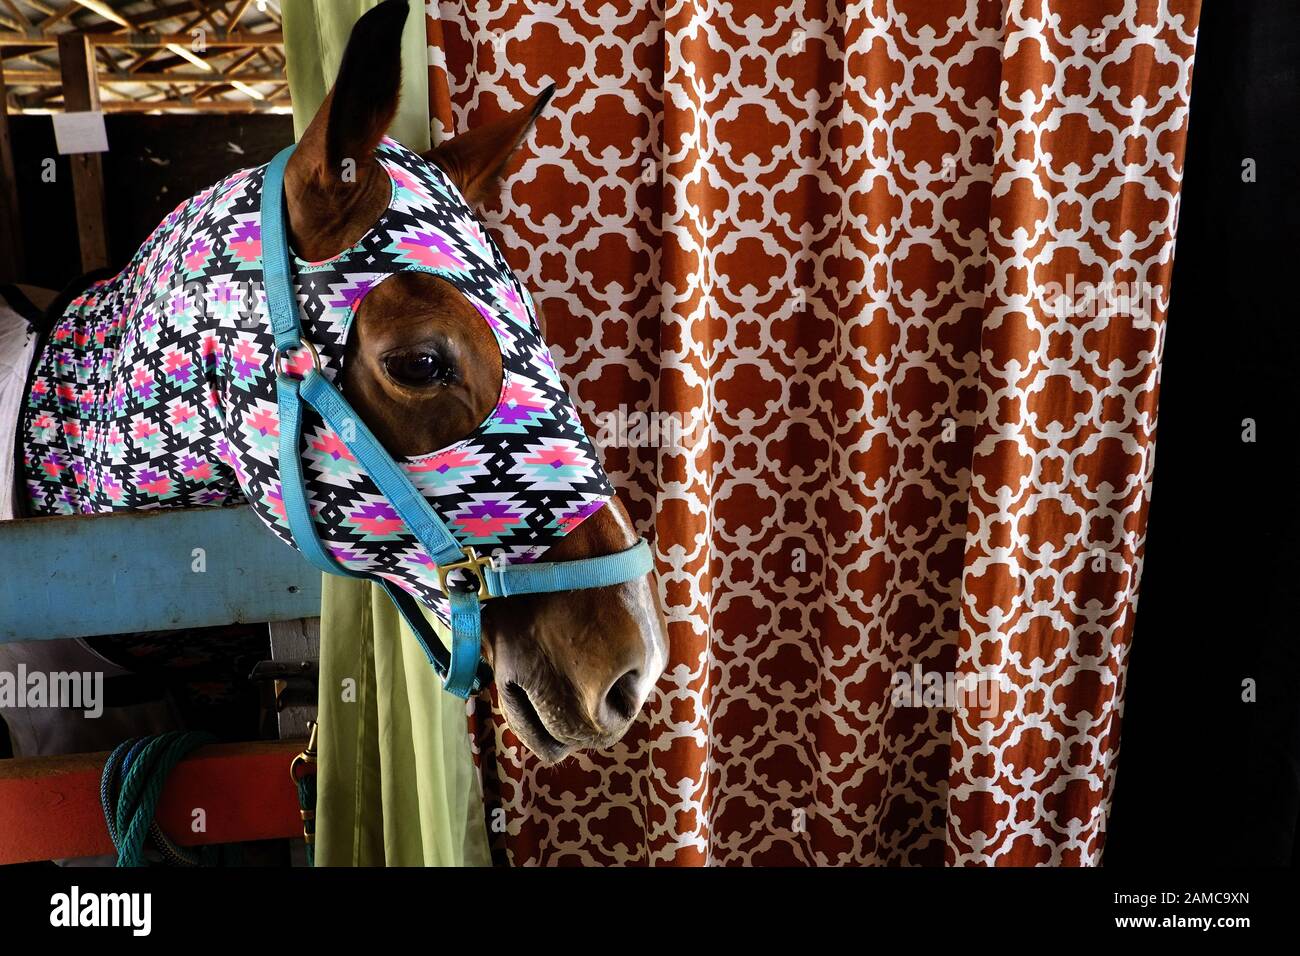 A horse in a stable at a county fair in the United States. Stock Photo